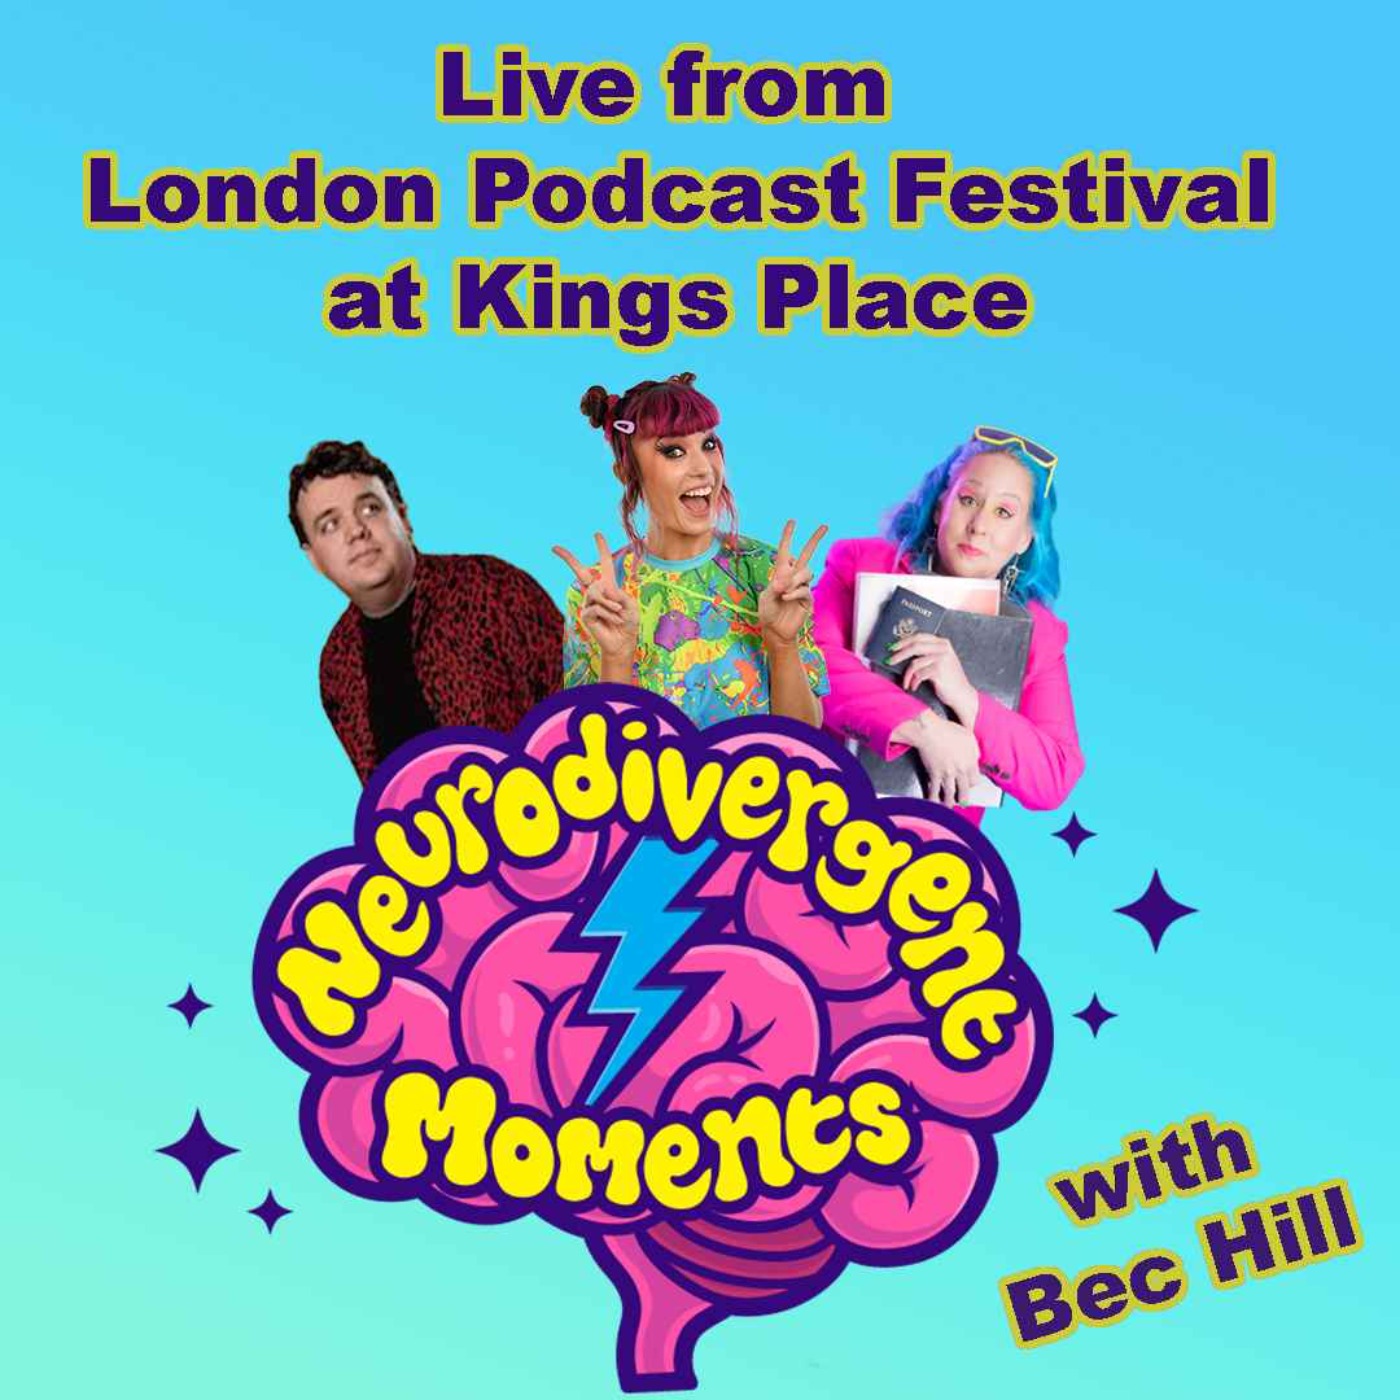 S04E01 - Seasons with Bec Hill (Live at London Podcast Festival)